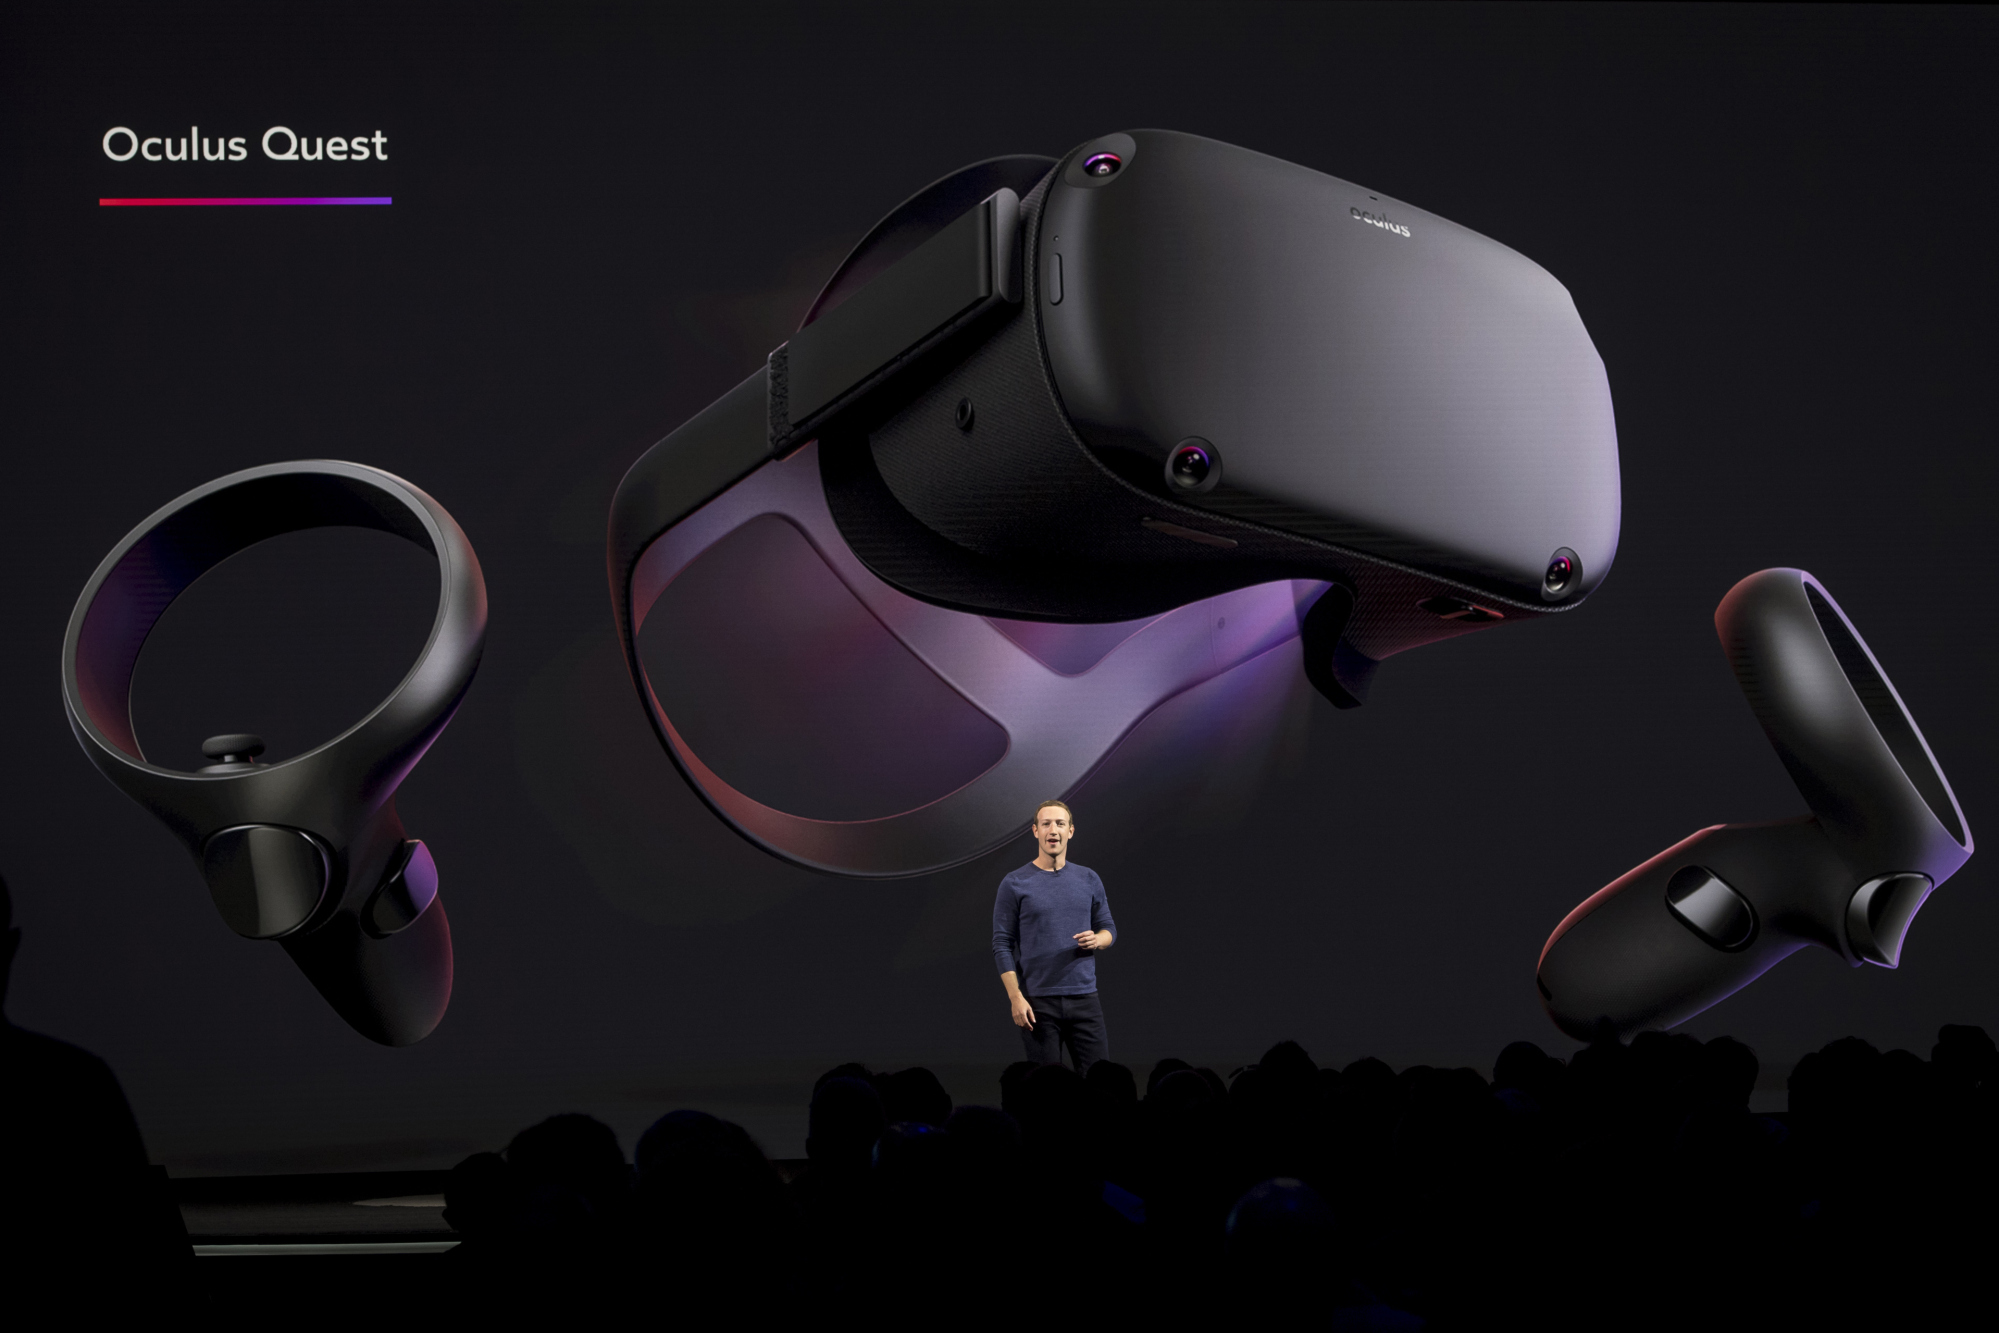 Introducing Oculus Quest — a New All-in-One VR System Coming Spring 2019